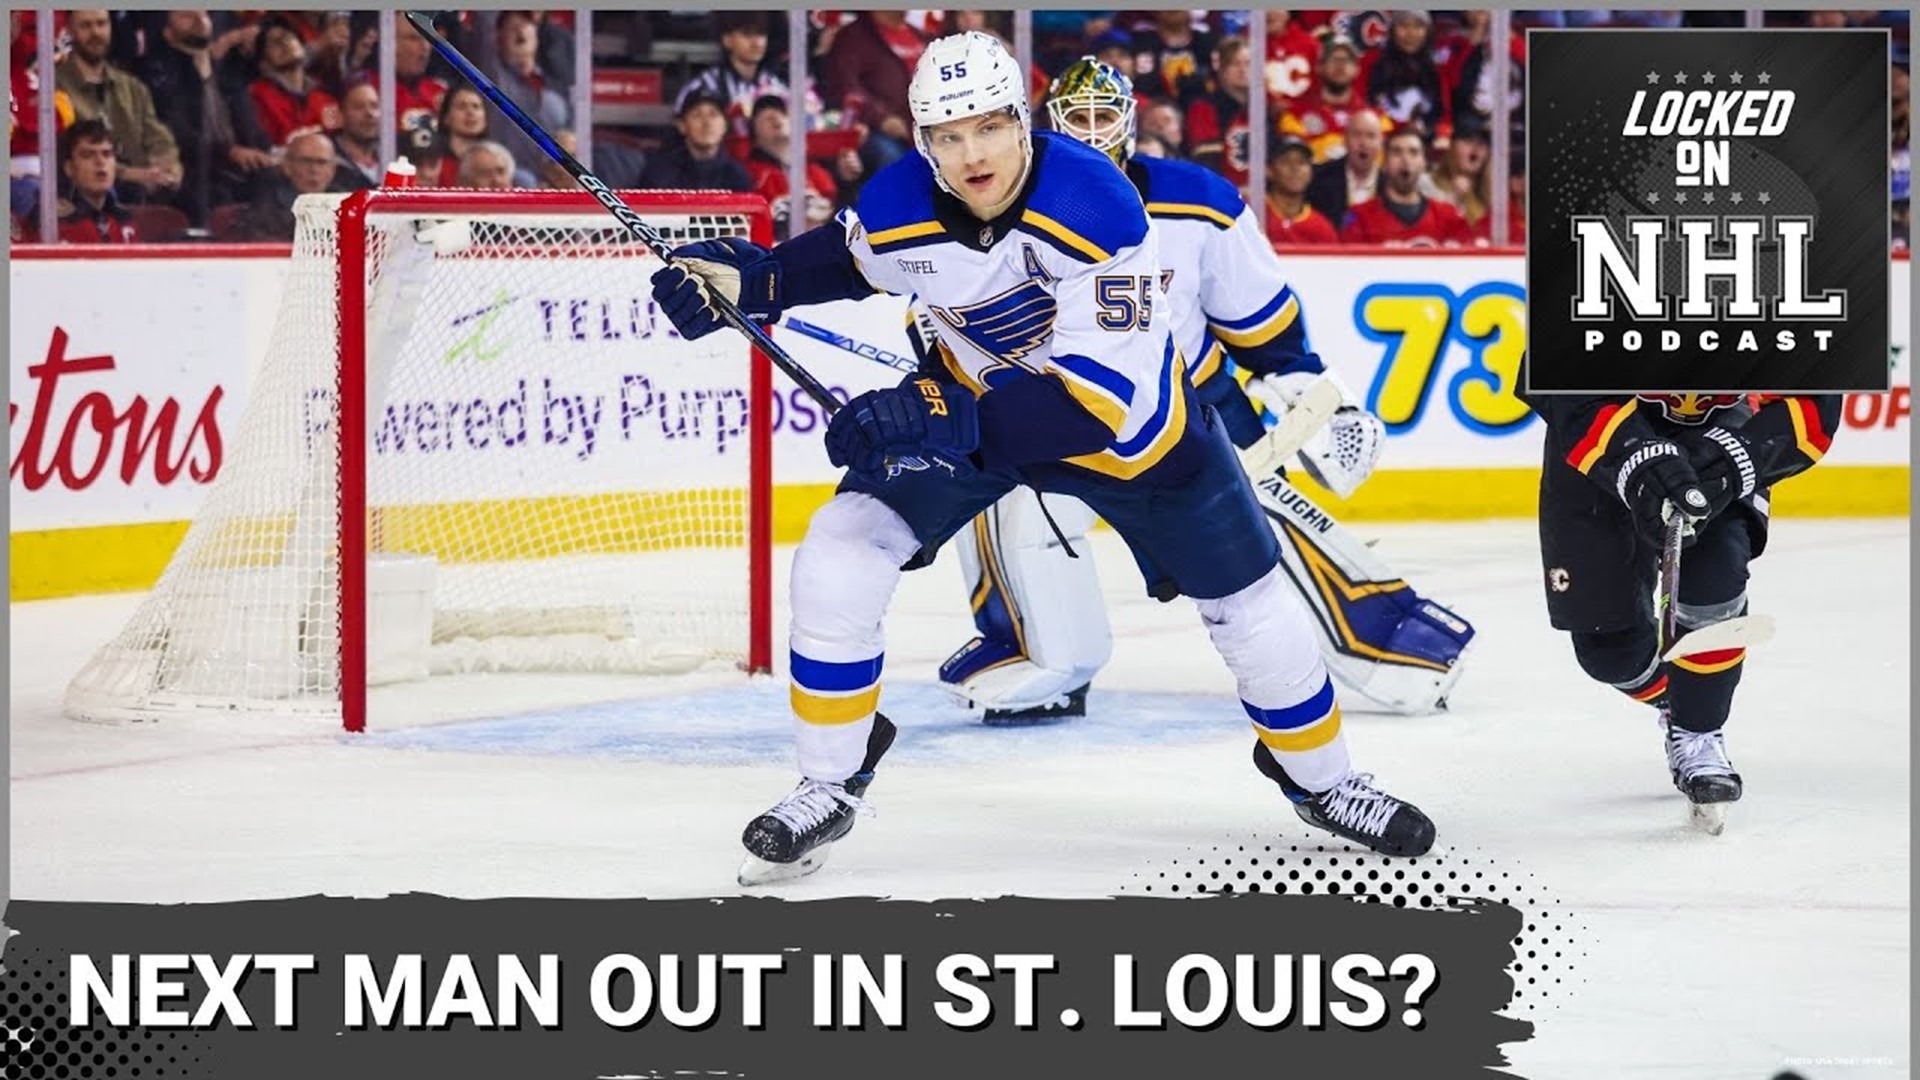 News, Weather & Sports in St. Louis